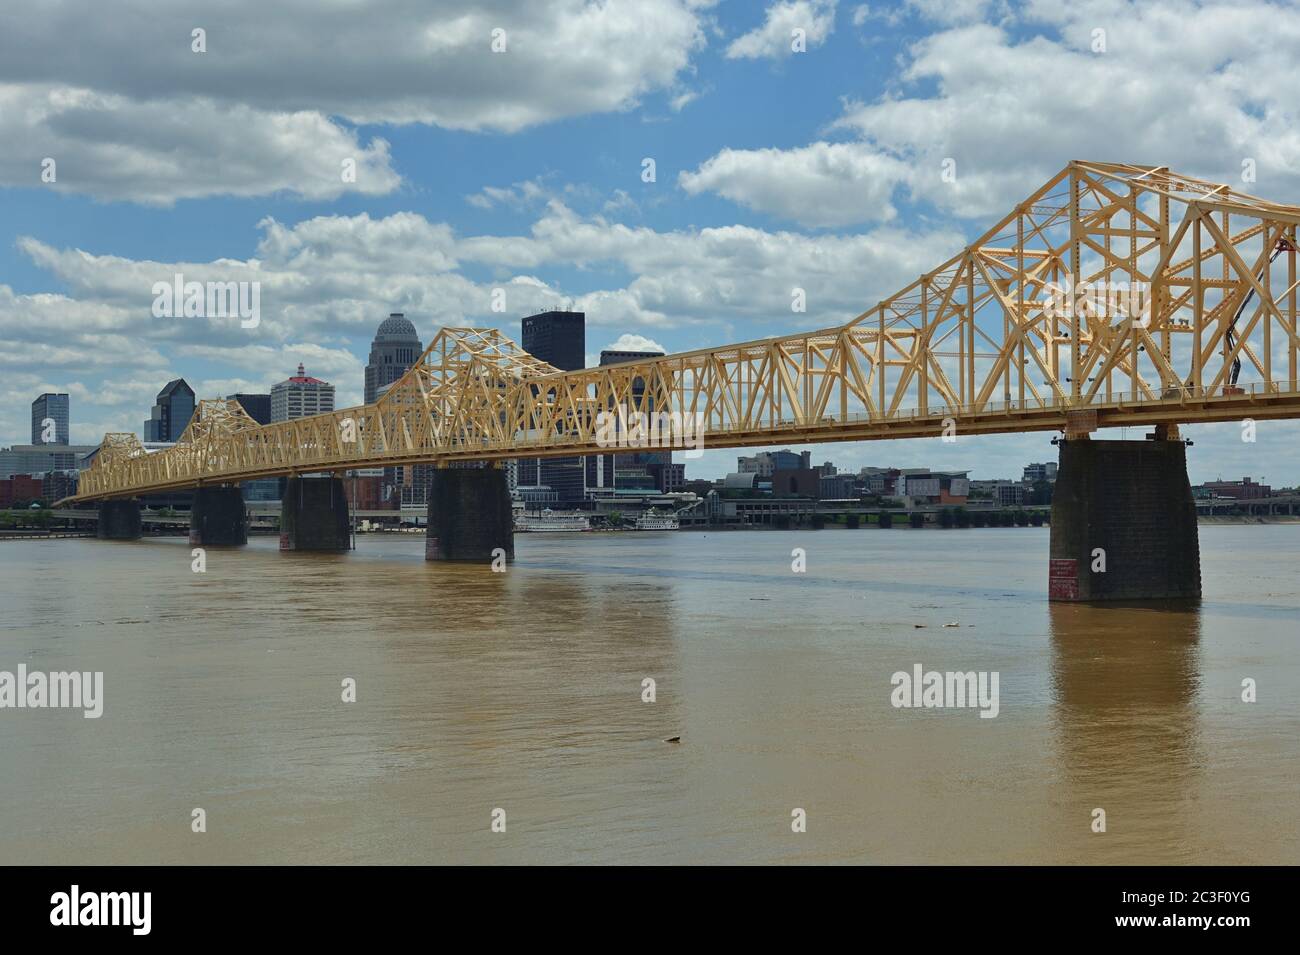 LOUISVILLE, KY -30 MAY 2020- View of the George Rogers Clark Memorial Bridge, (Second Street Bridge) over the Ohio River and the Louisville, Kentucky Stock Photo